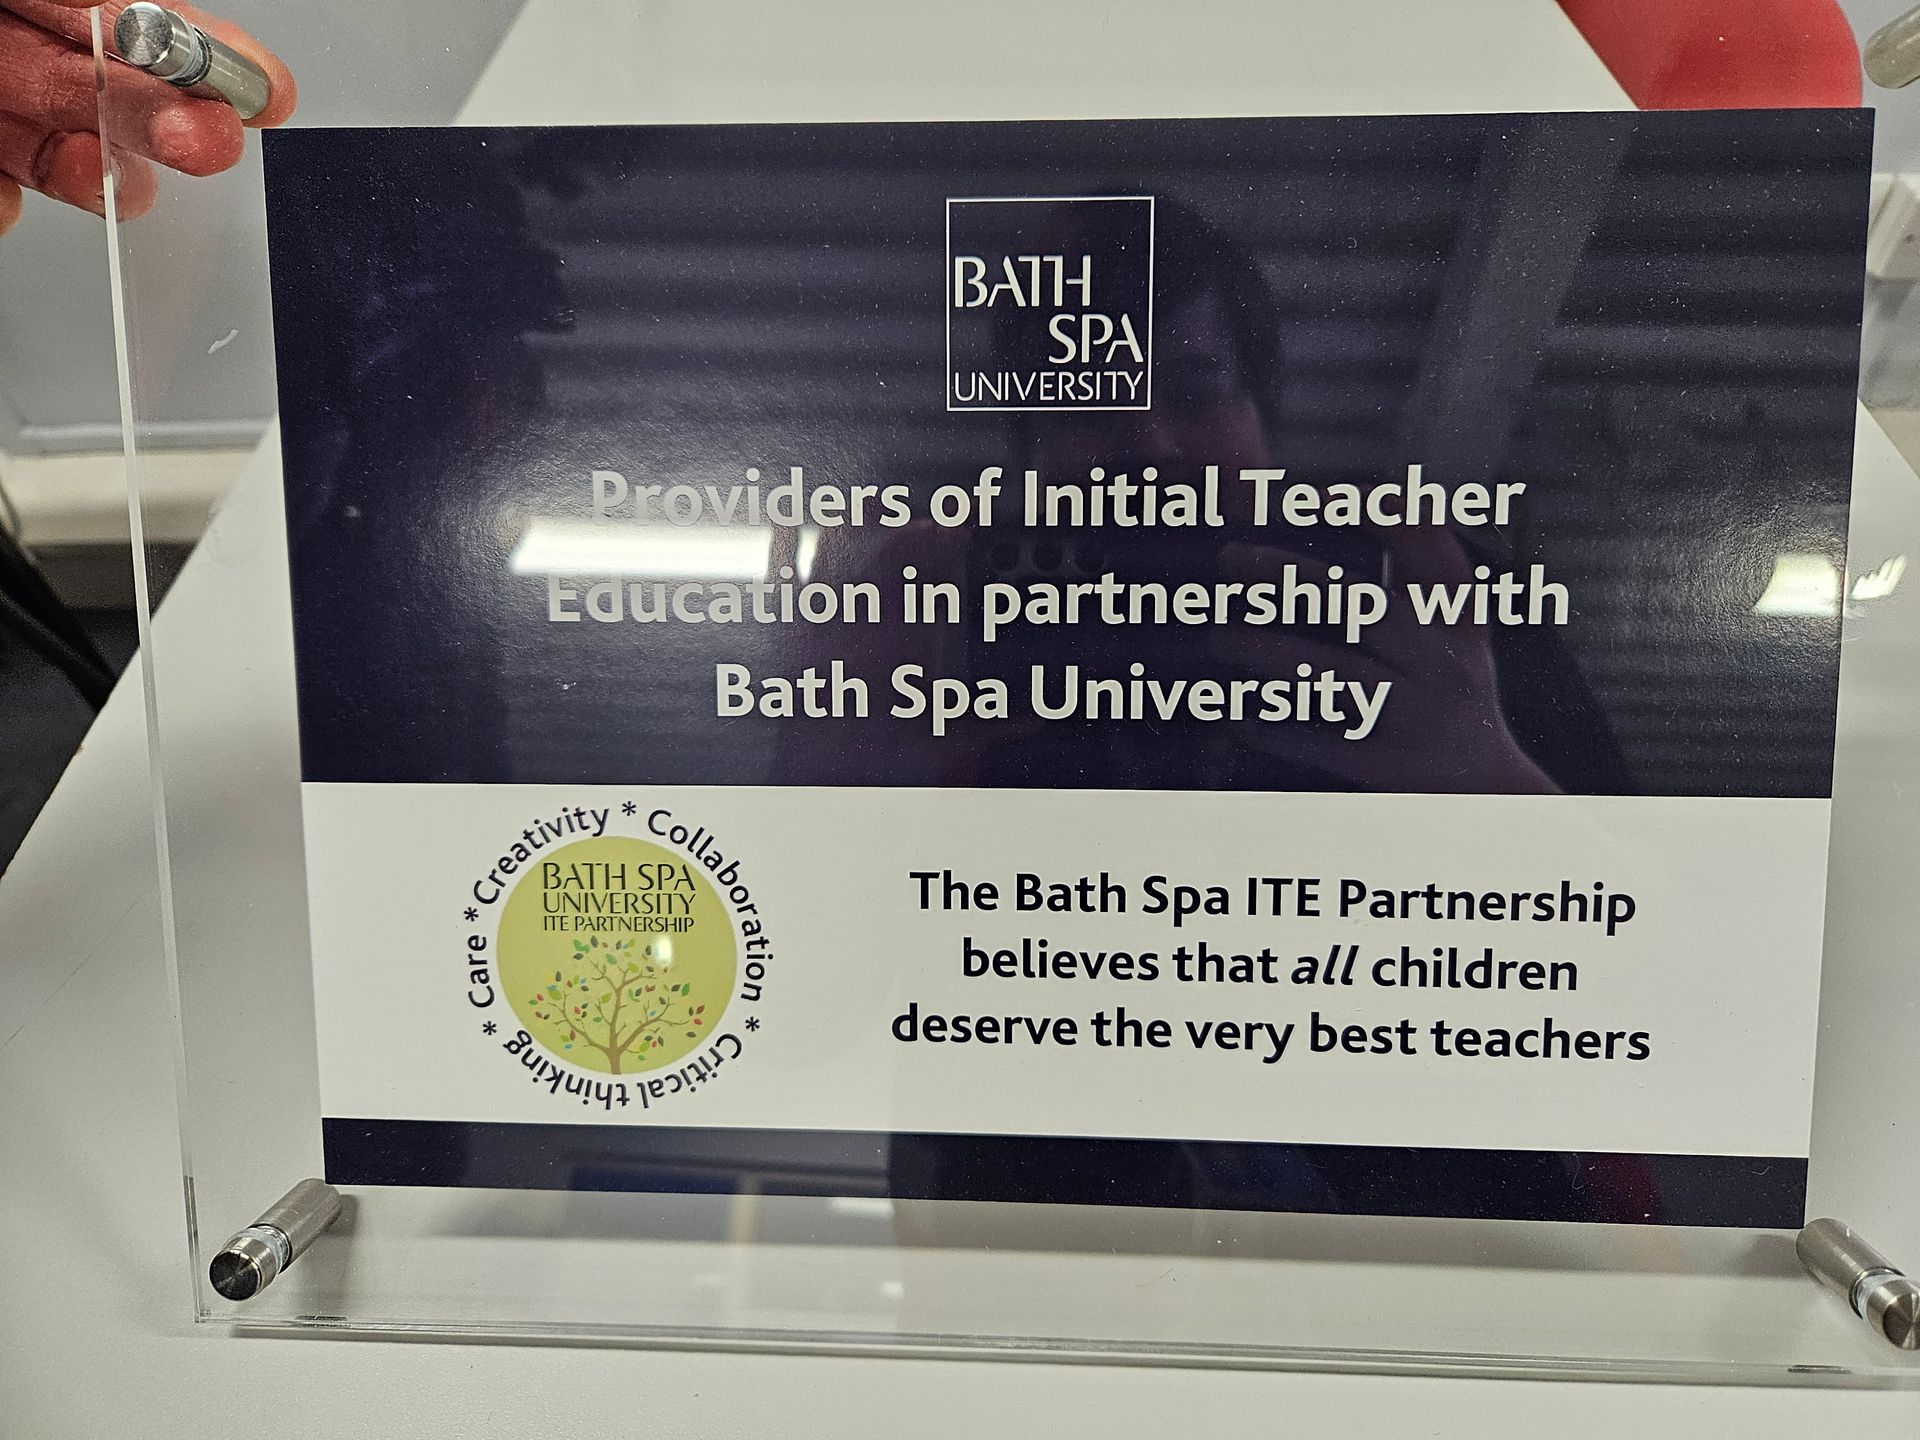 We are very proud to have been given this plaque from Bath Spa University, celebrating the amazing work we do with them to support our trainee teachers. #kdsTeam